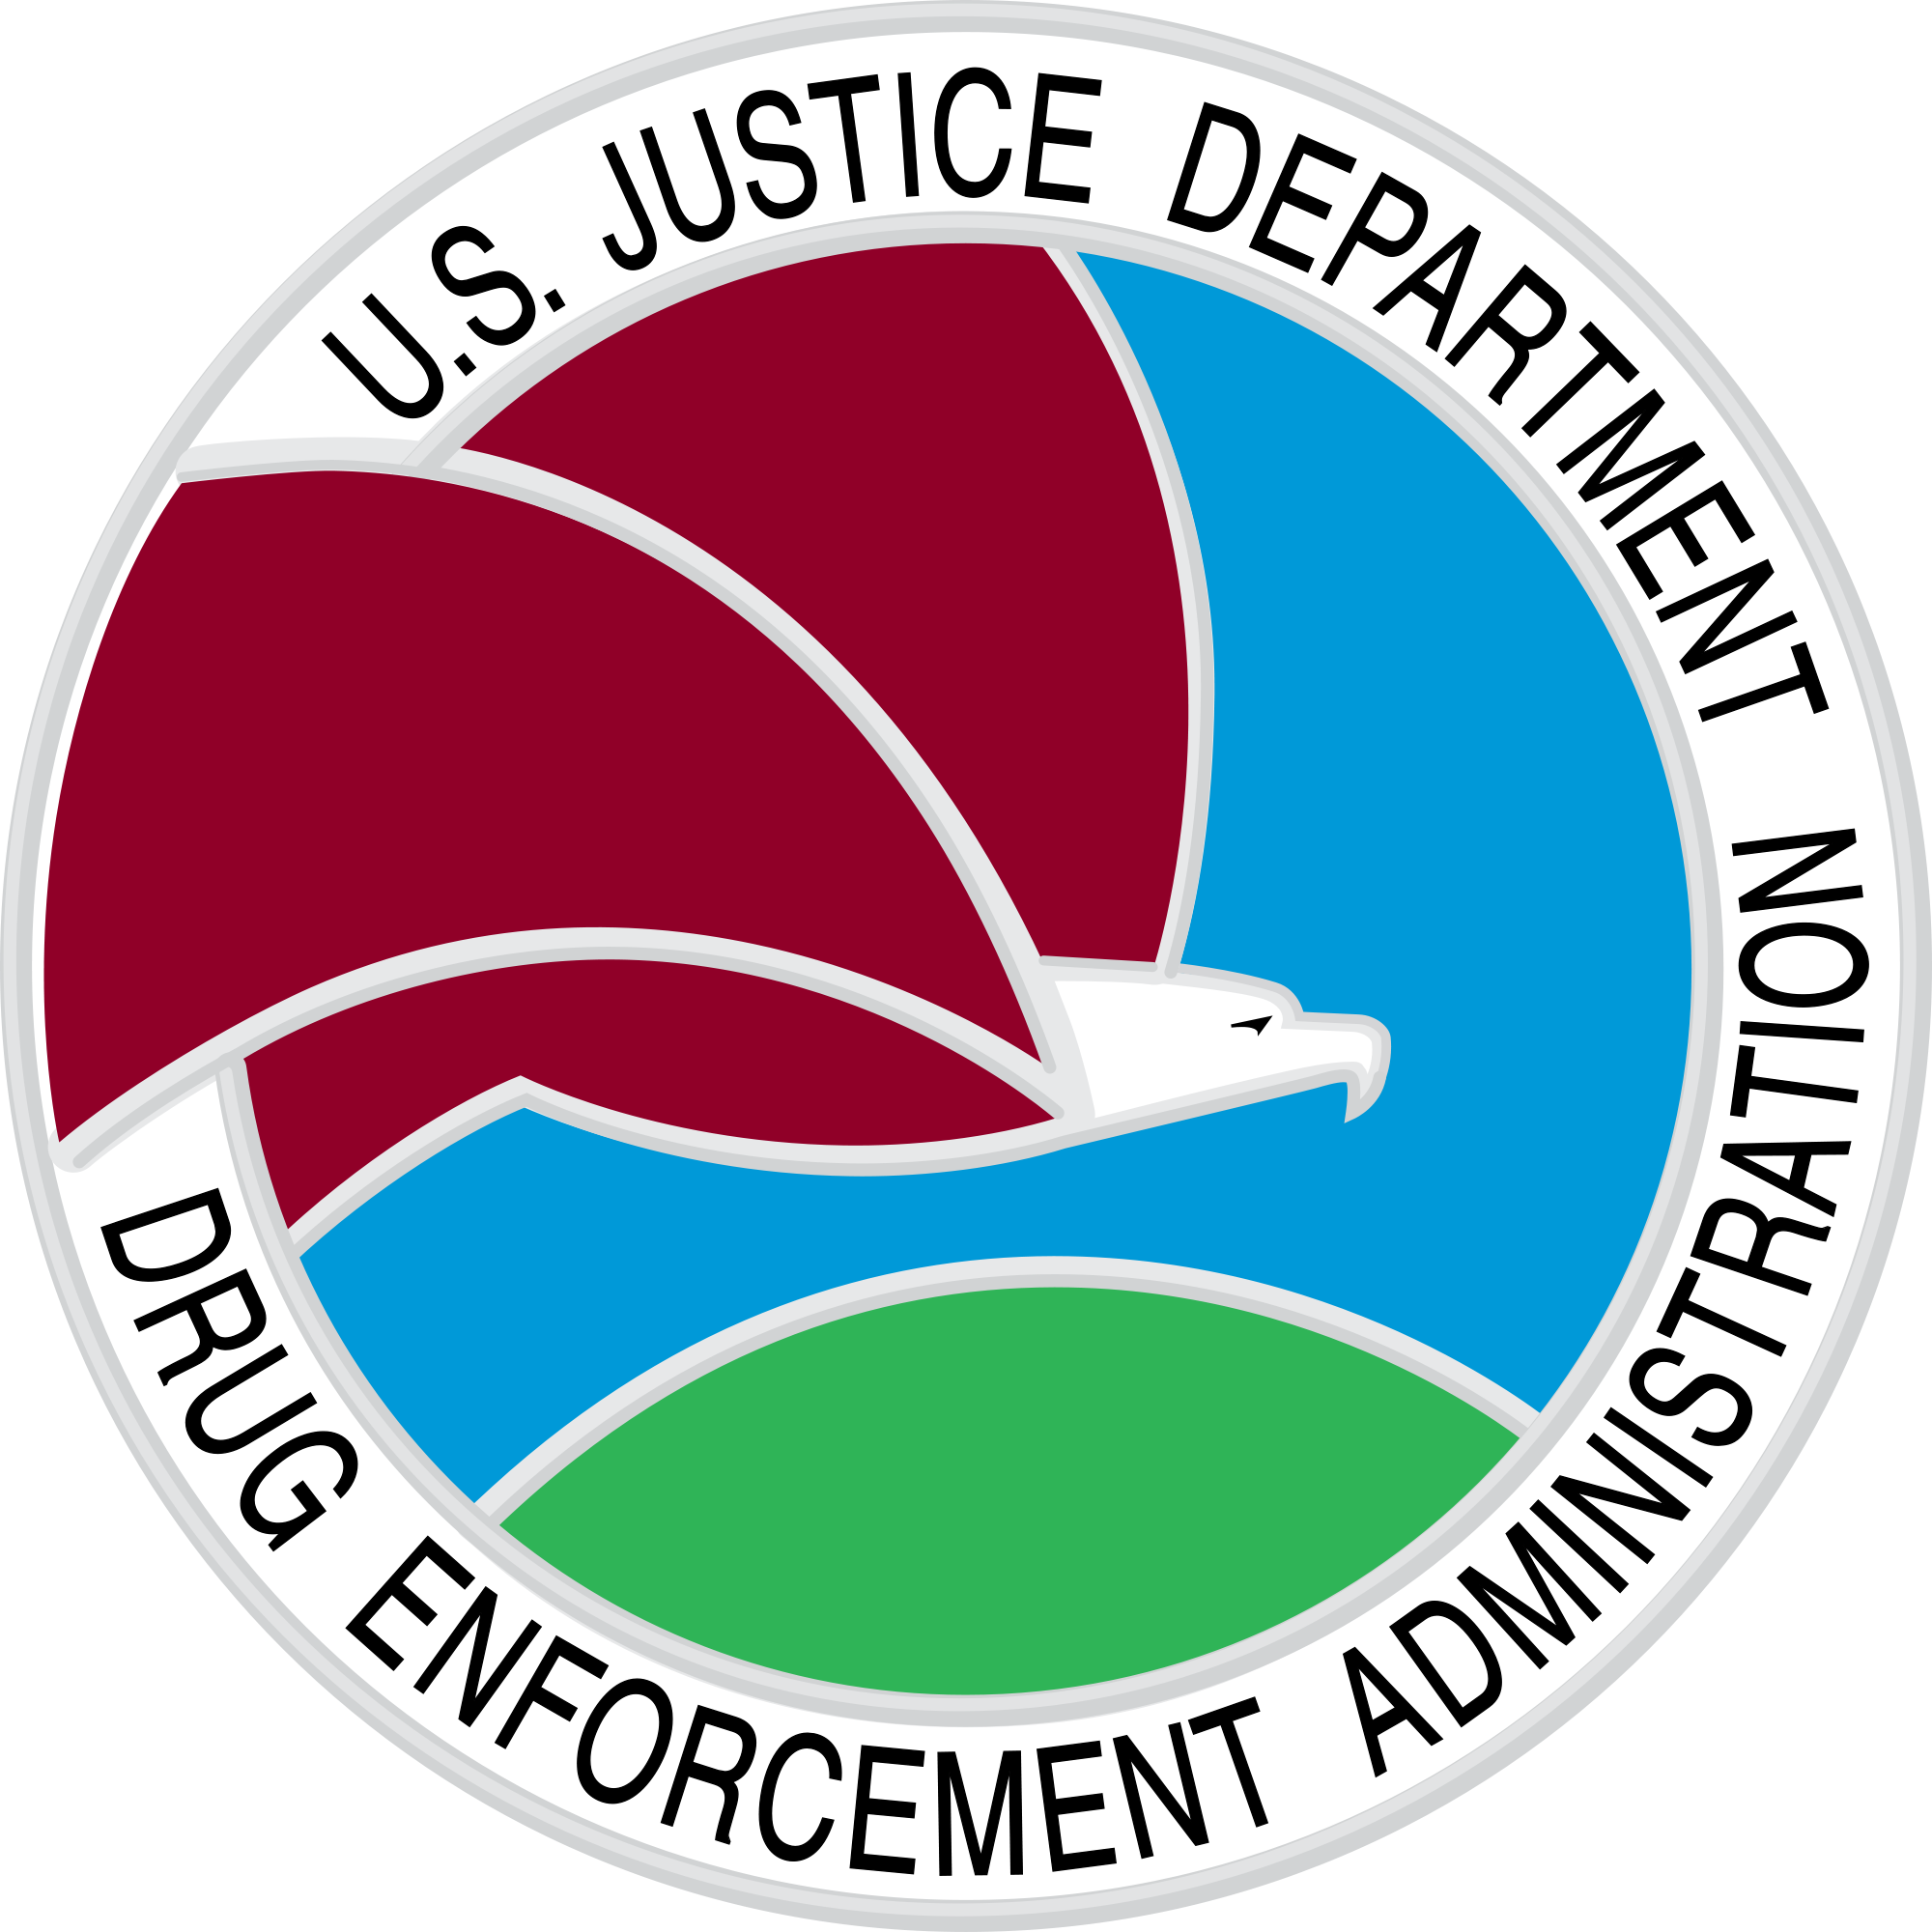 Dea issues nationwide.